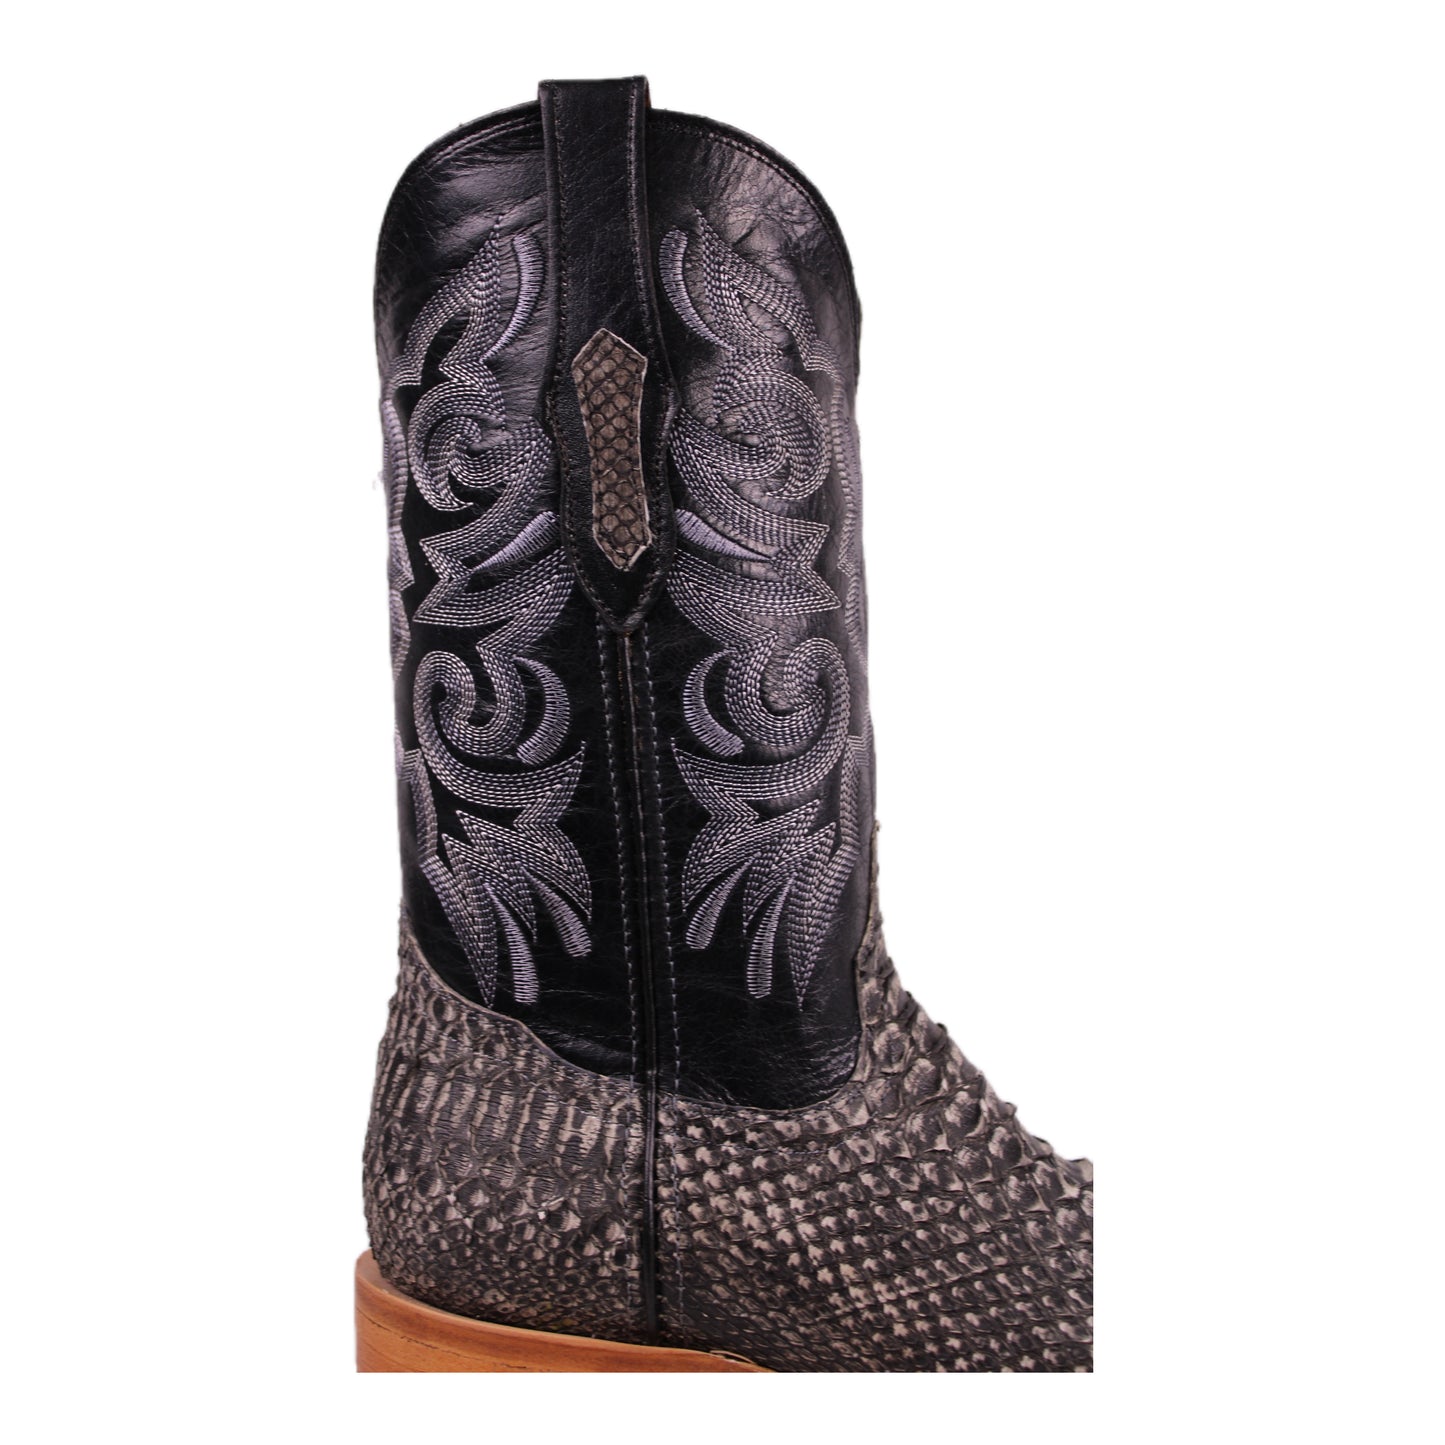 Diligencia Rustic Black Exotic Leather Boot